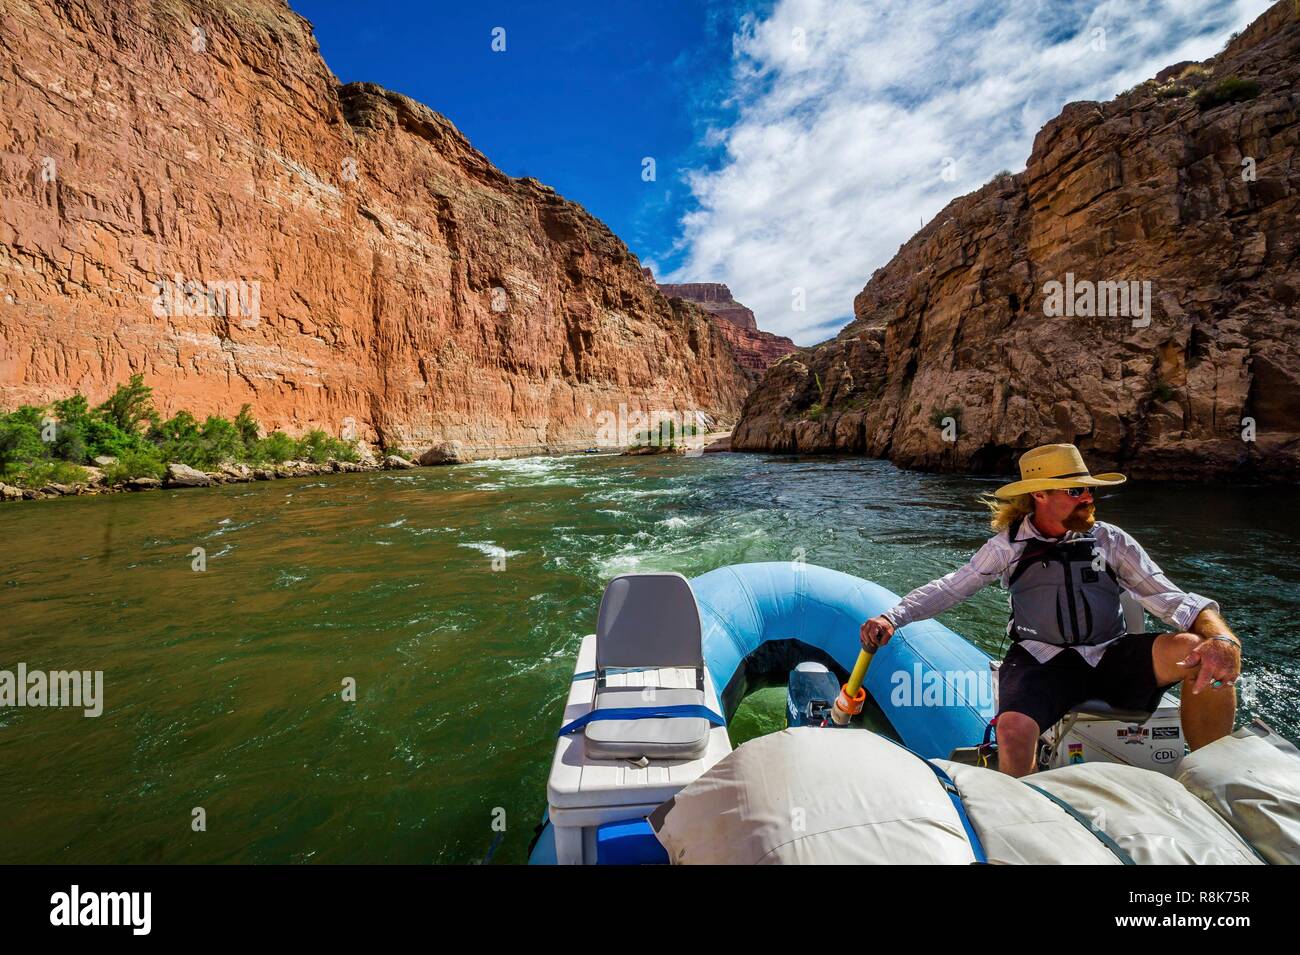 United States, Arizona, Grand Canyon National Park, rafting down the Colorado river between Lee's Ferry near Page and Phantom Ranch, Vermillion Cliffs Stock Photo